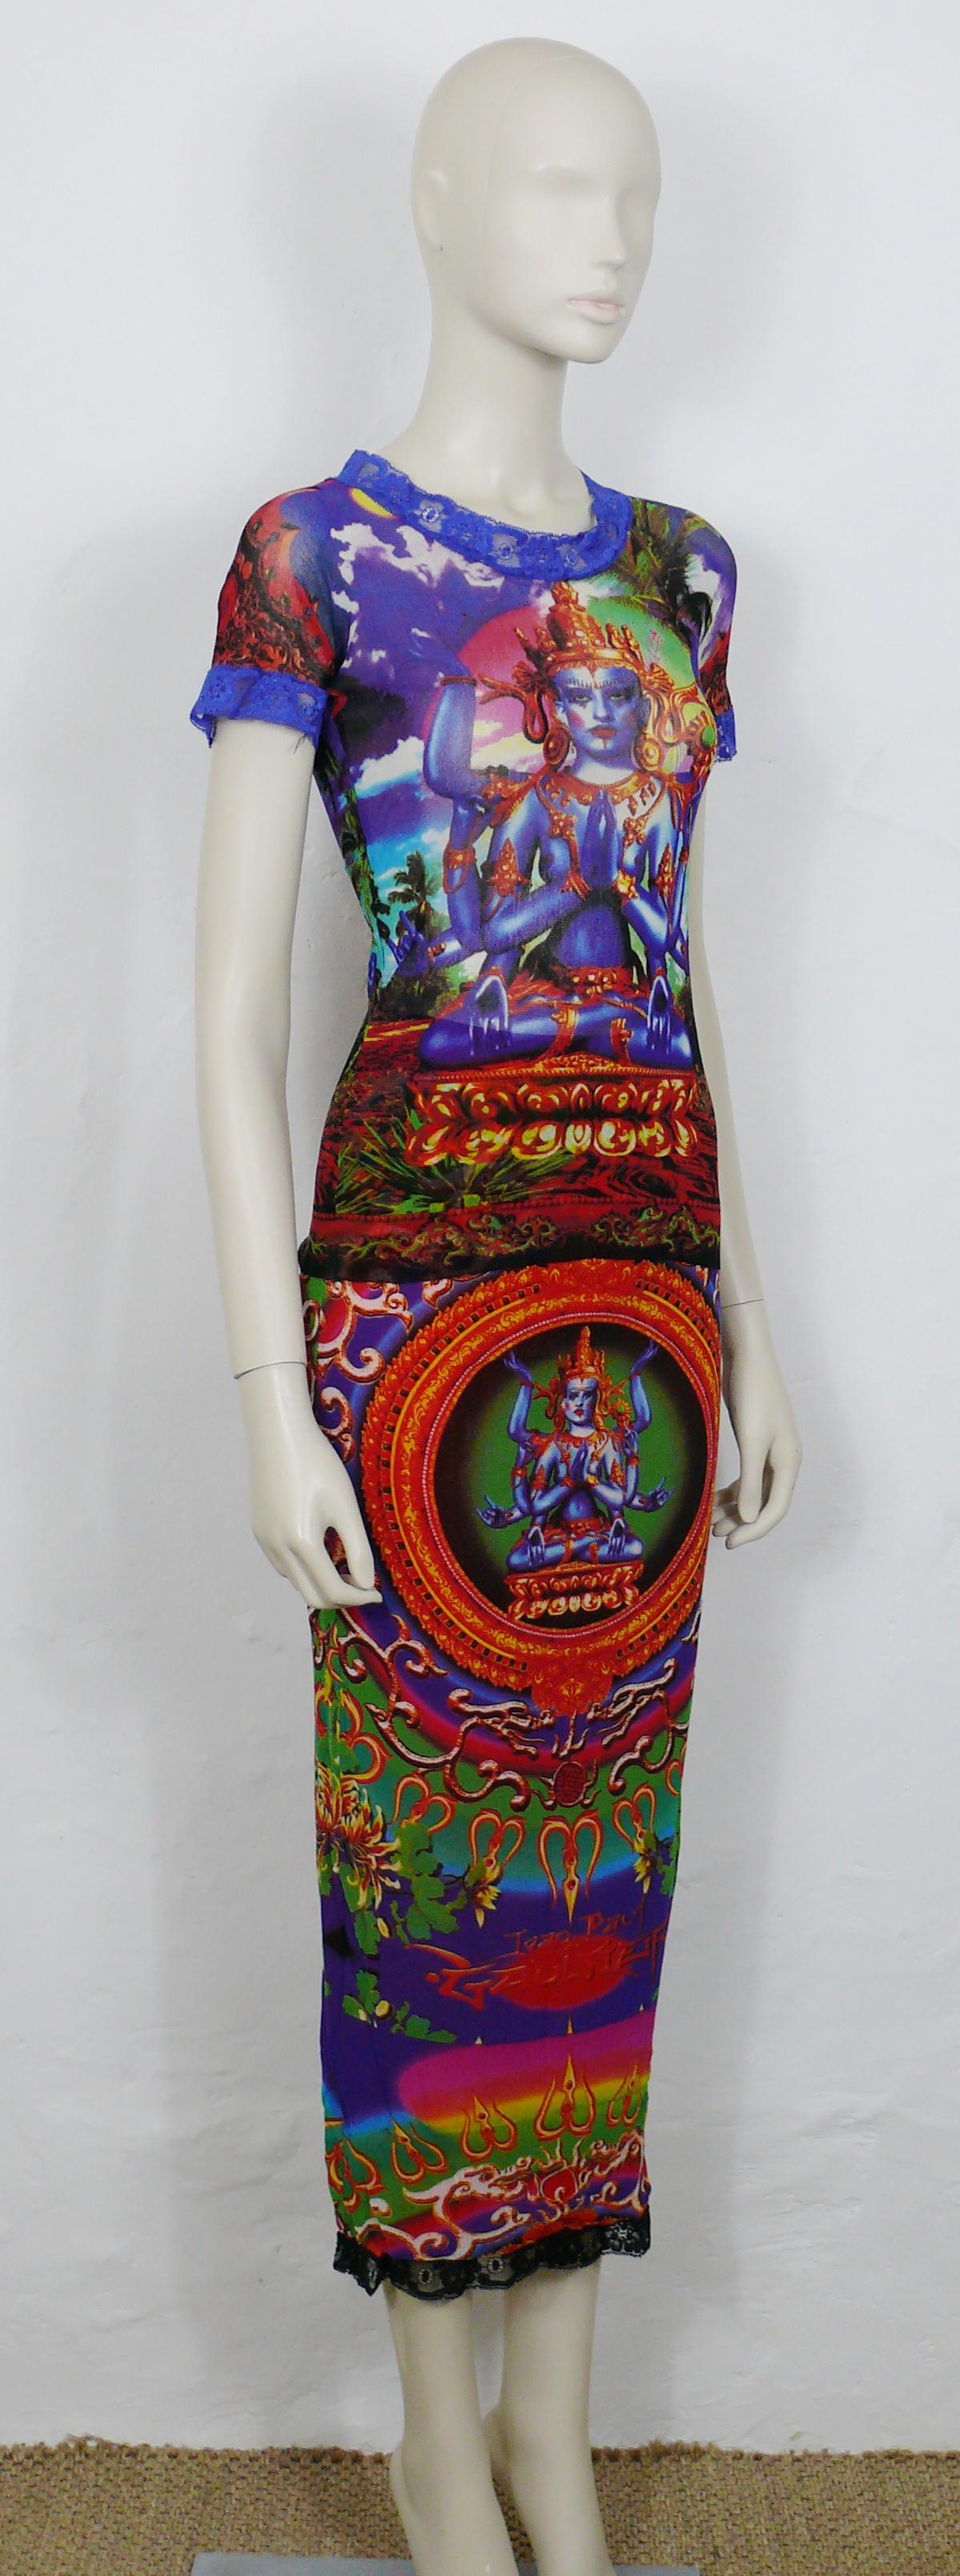 JEAN PAUL GAULTIER vintage FUZZI sheer mesh maxi skirt and top featuring an Hindu deity print in vibrant colors.

Label reads JEAN PAUL GAULTIER MAILLE CLASSIQUE Paris.
Made in Italy.

TOP features :
- FUZZI sheer mesh featuring an Hindy deity print